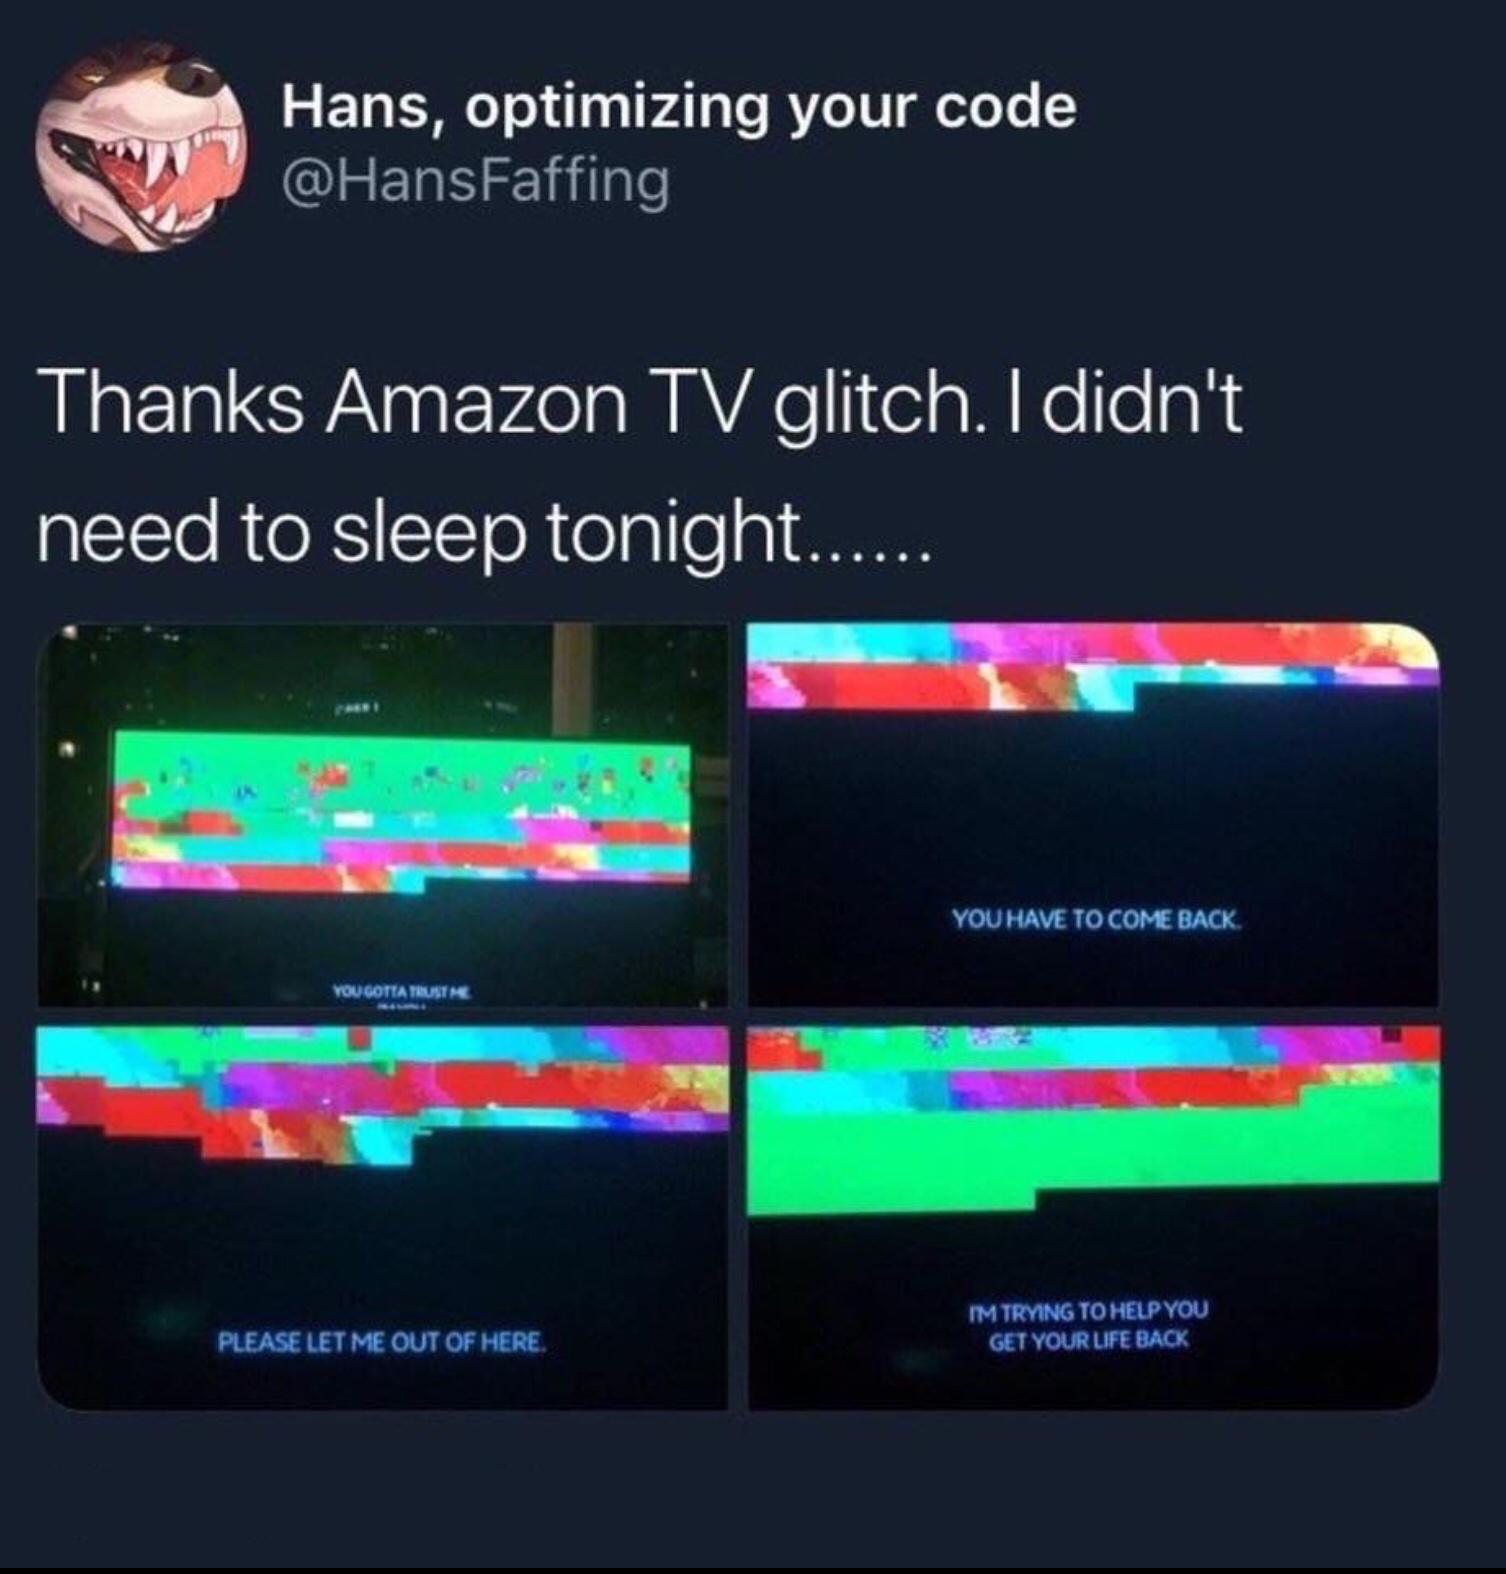 r tihi - Hans, optimizing your code Thanks Amazon Tv glitch. I didn't need to sleep tonight...... You Have To Come Back Please Let Me Out Of Here Im Trying Torelp You Get Your Life Back